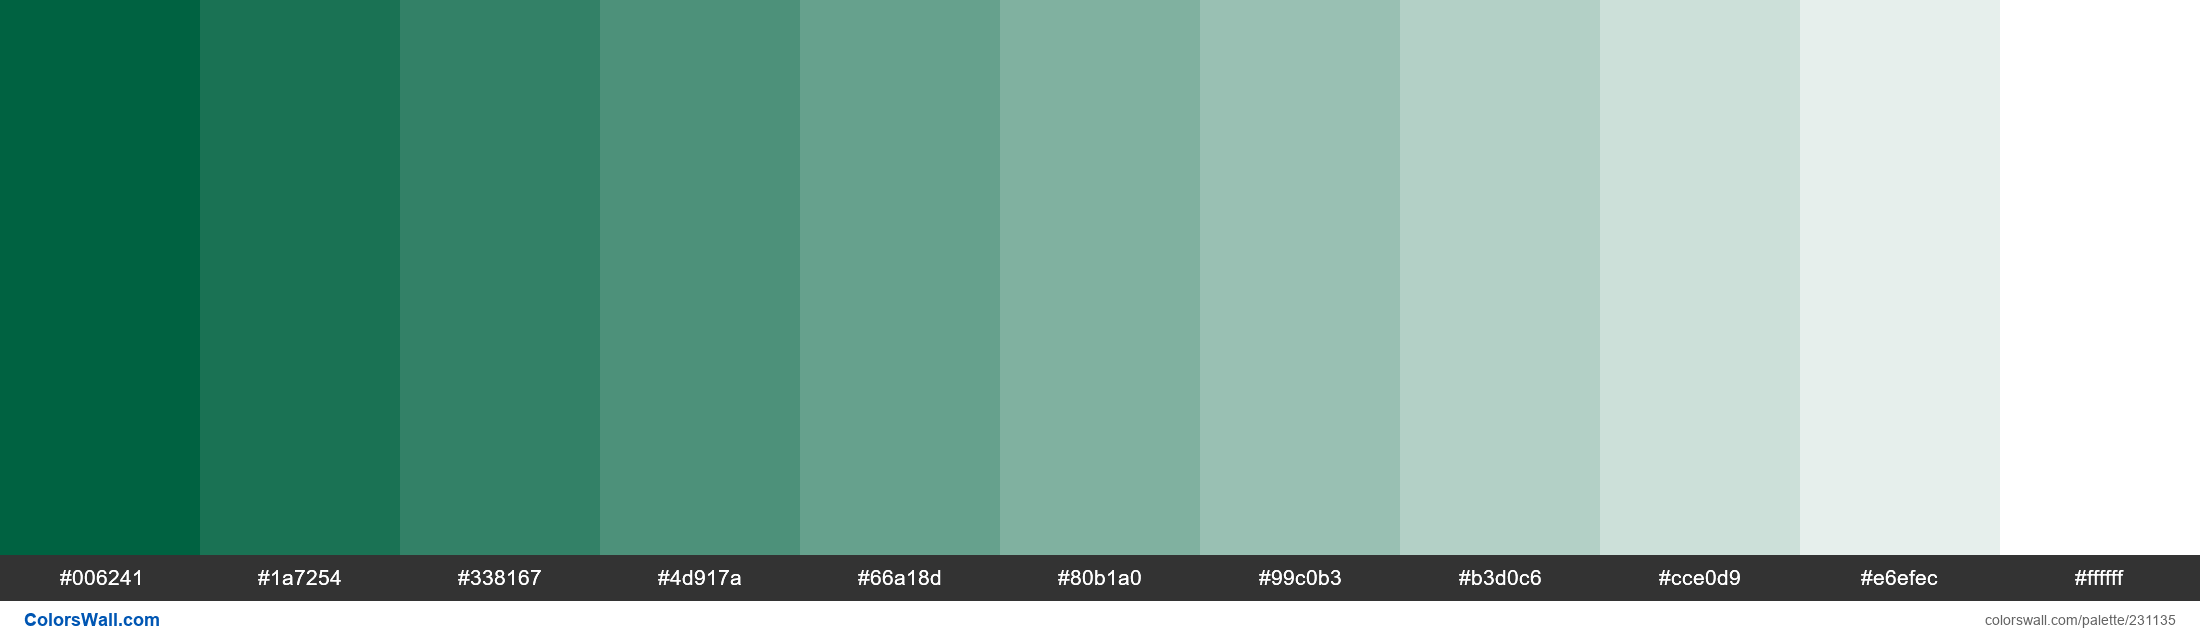 Starbucks Green Colors Palette ColorsWall